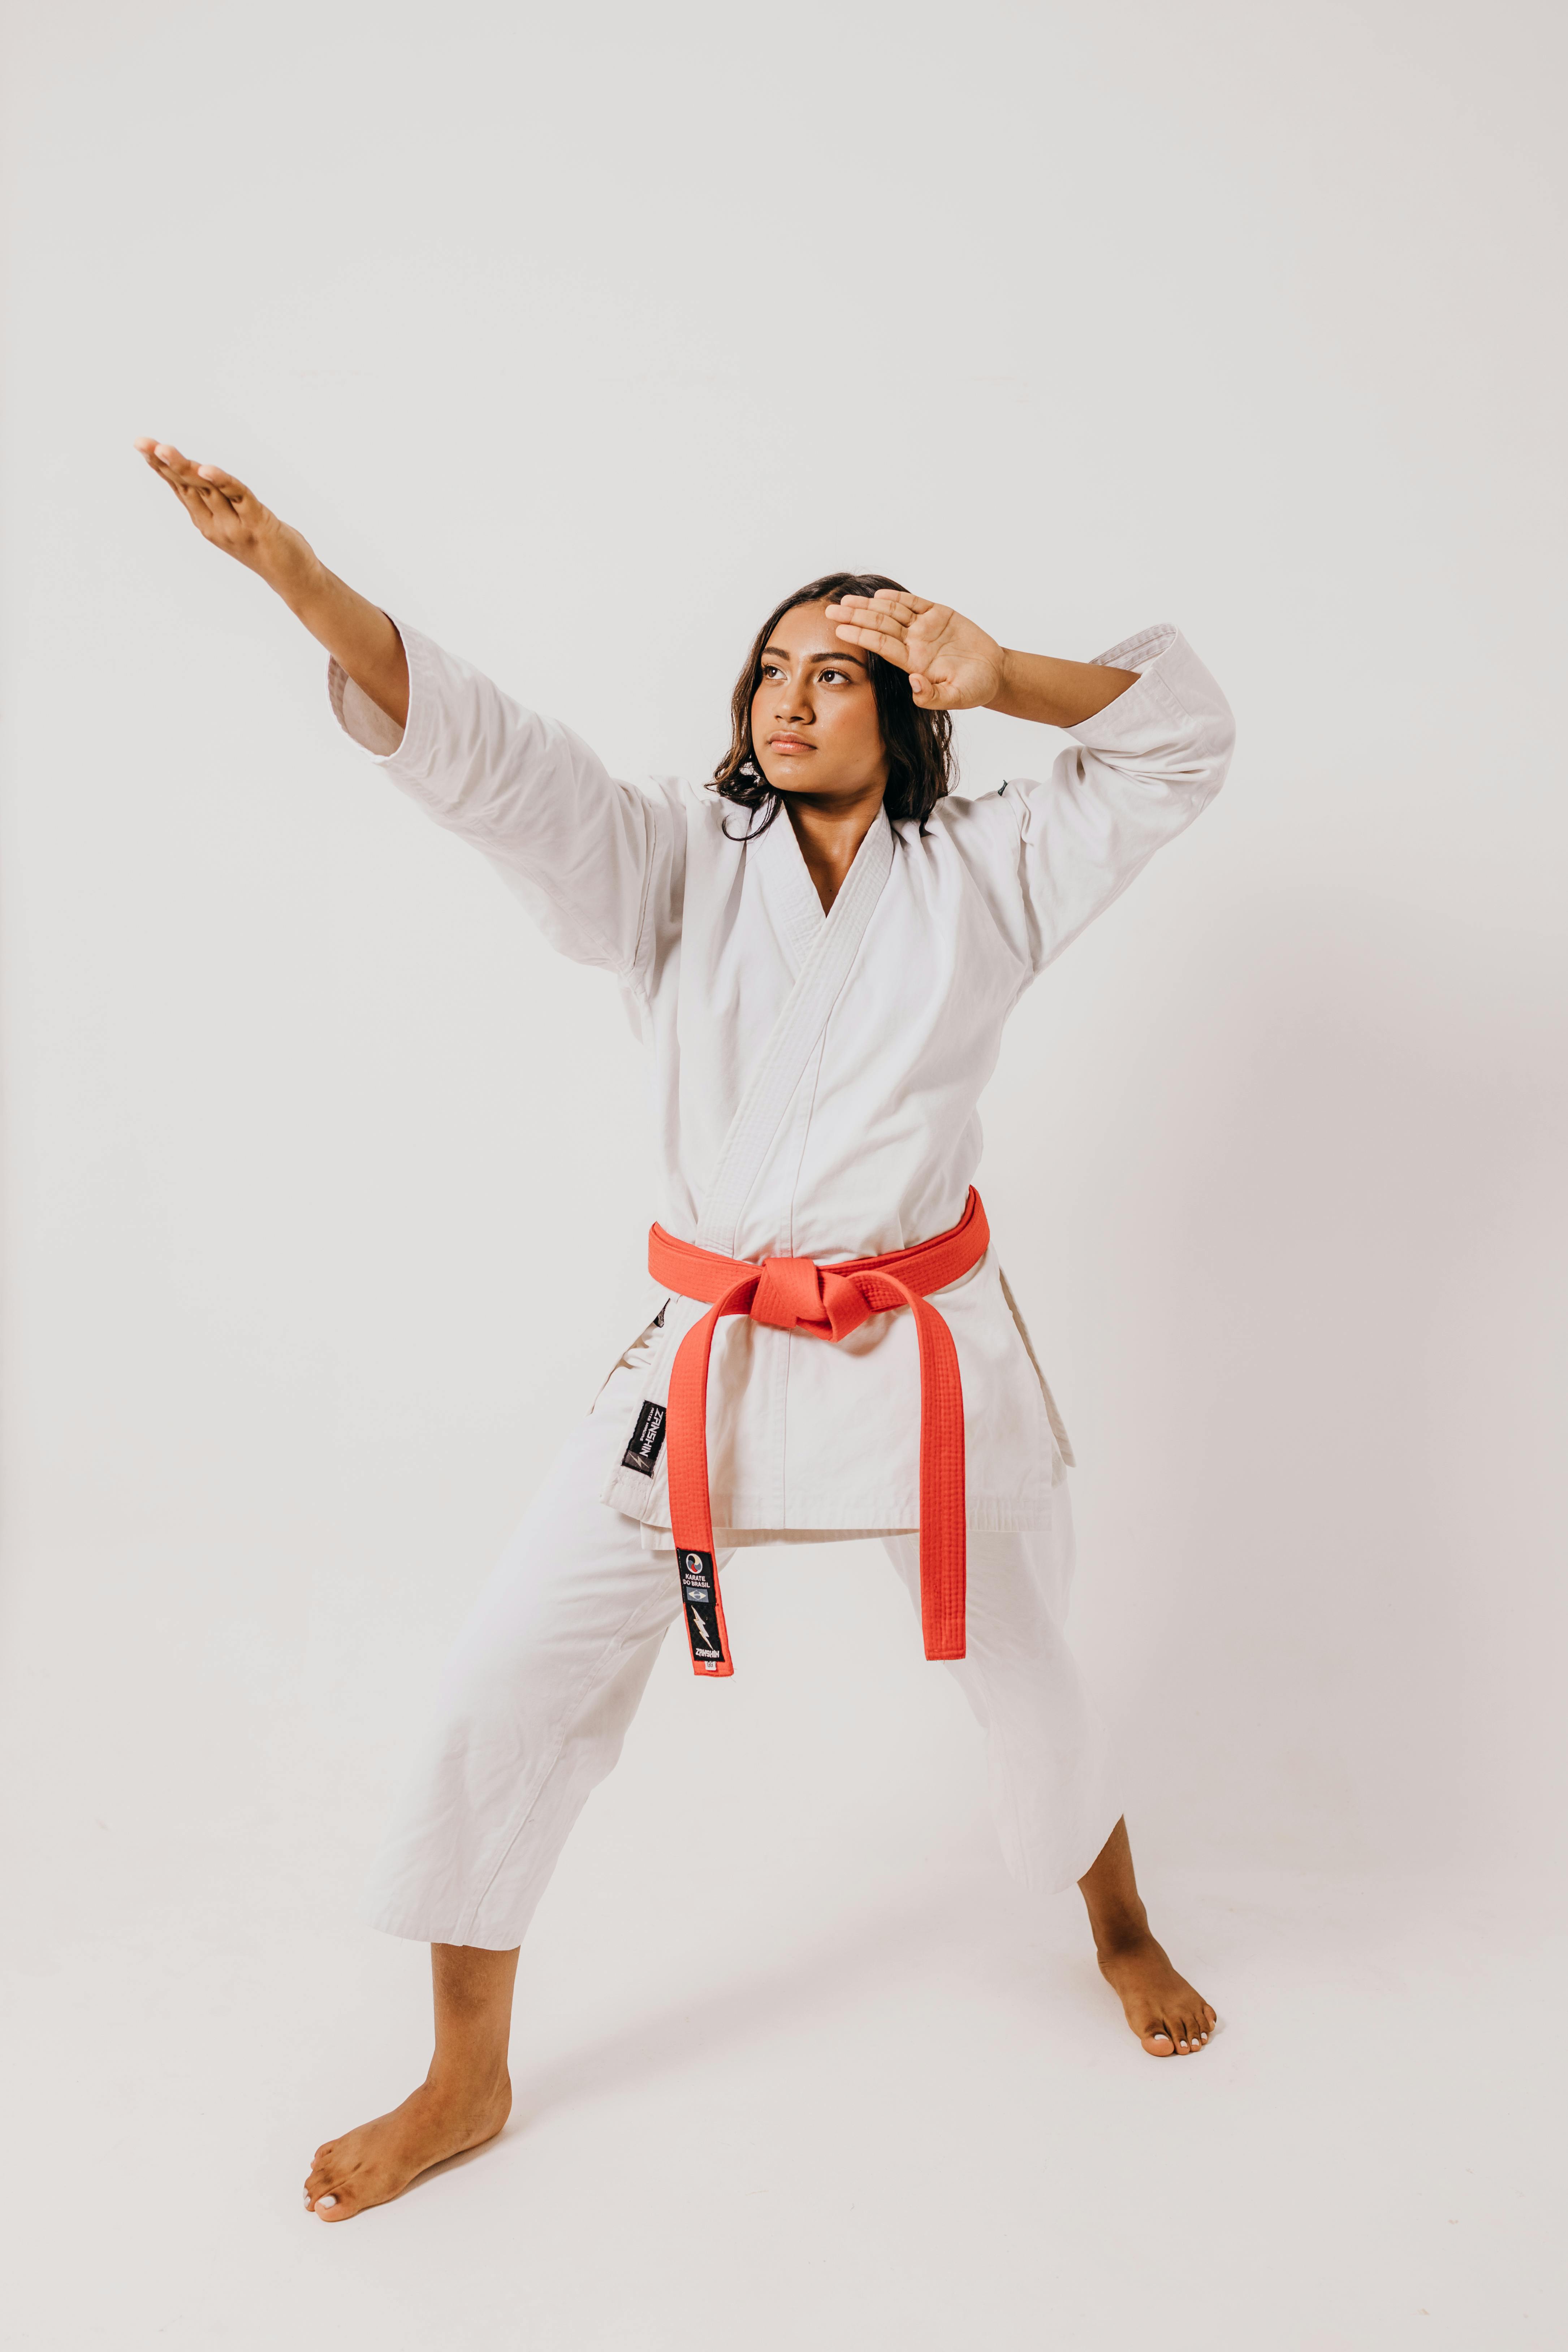 Karate Fighter - Serious man in karate pose with intense look - CleanPNG /  KissPNG